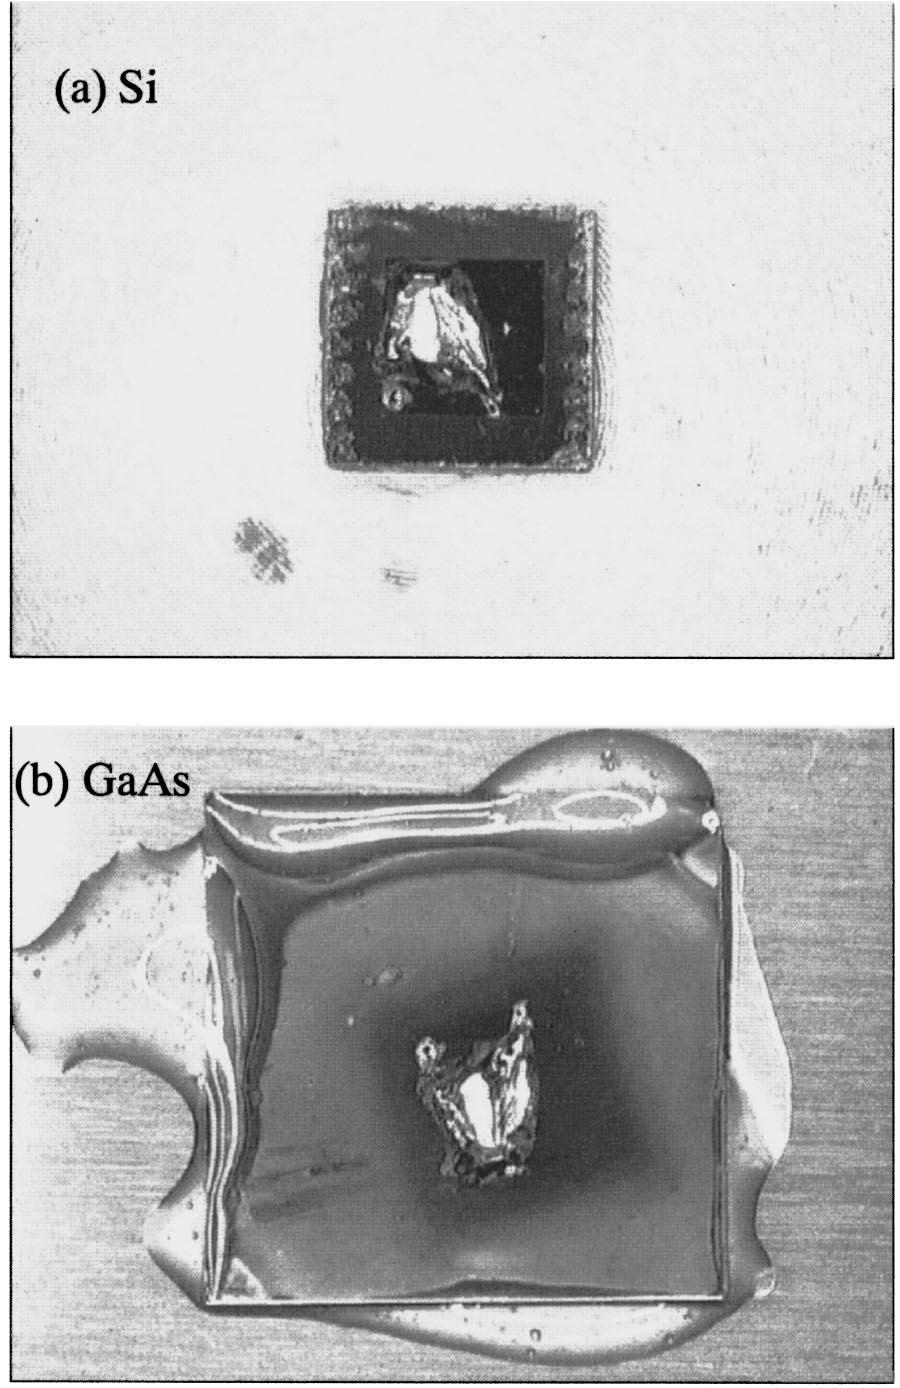 2116 Howlader, Watanabe, and Suga: Bonding strength and interface current of p-siõn-gaas 2116 FIG. 2. Time dependence of the sputtering on the surface roughness of p-si and n-gaas with a 0.6 Ar-FAB.